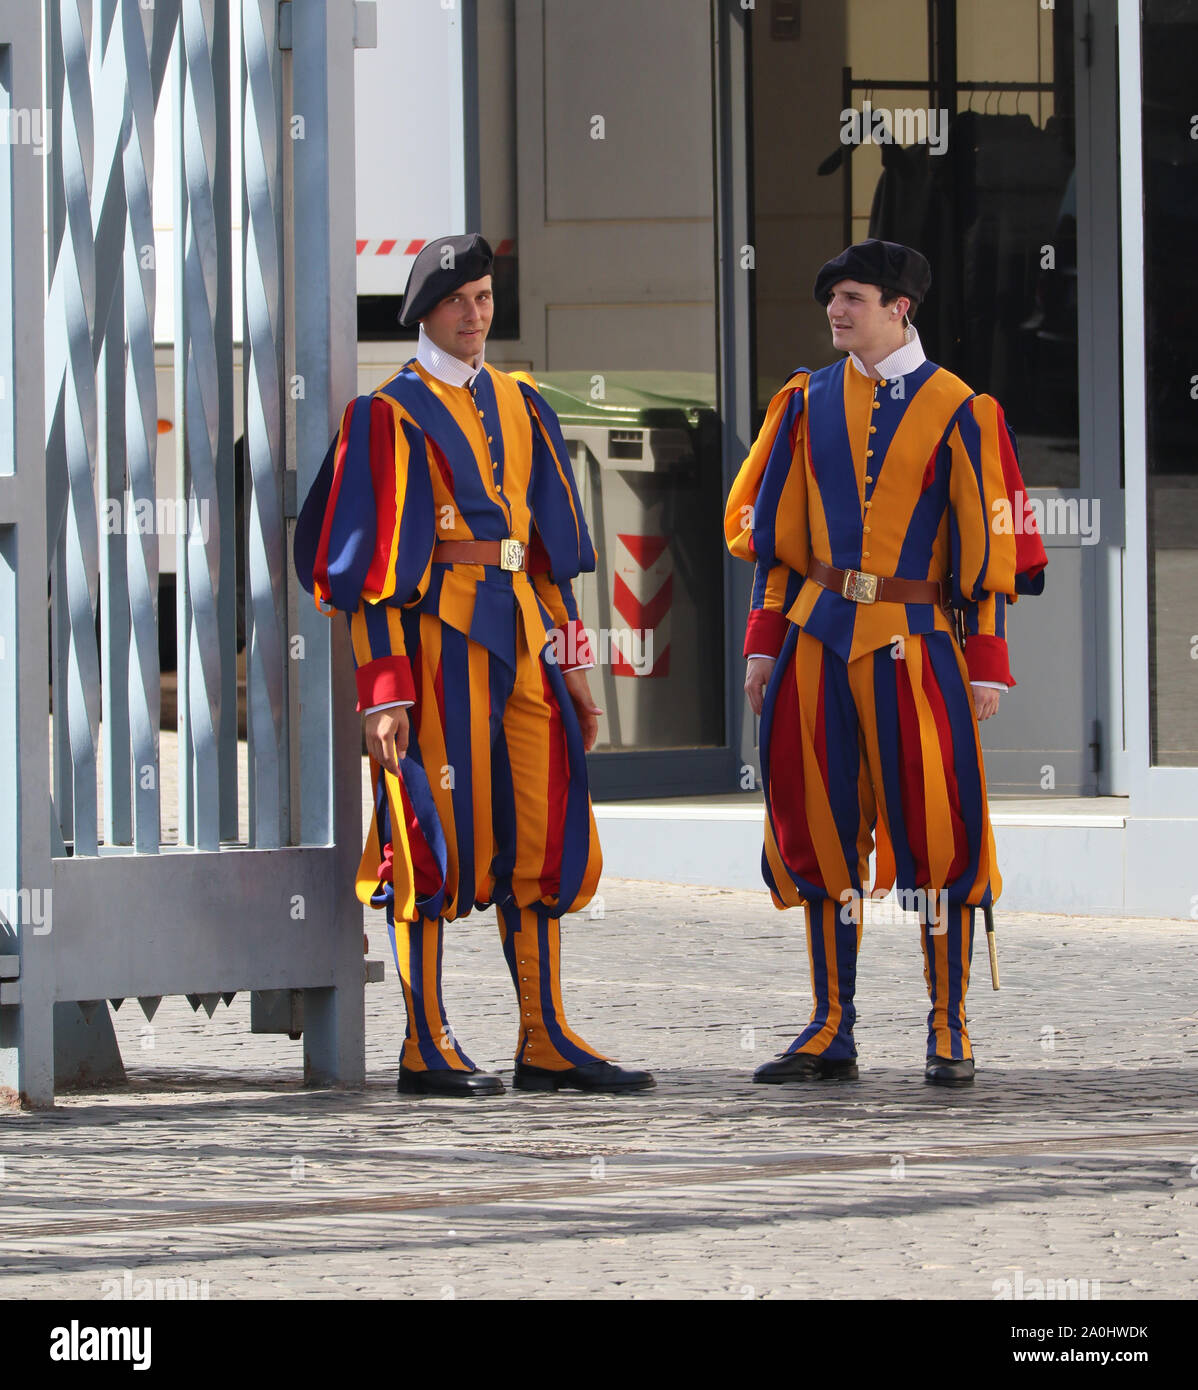 Pontifical Swiss Guard, Rome, Italy, 15 September 2019, Photo by Richard Goldschmidt Stock Photo